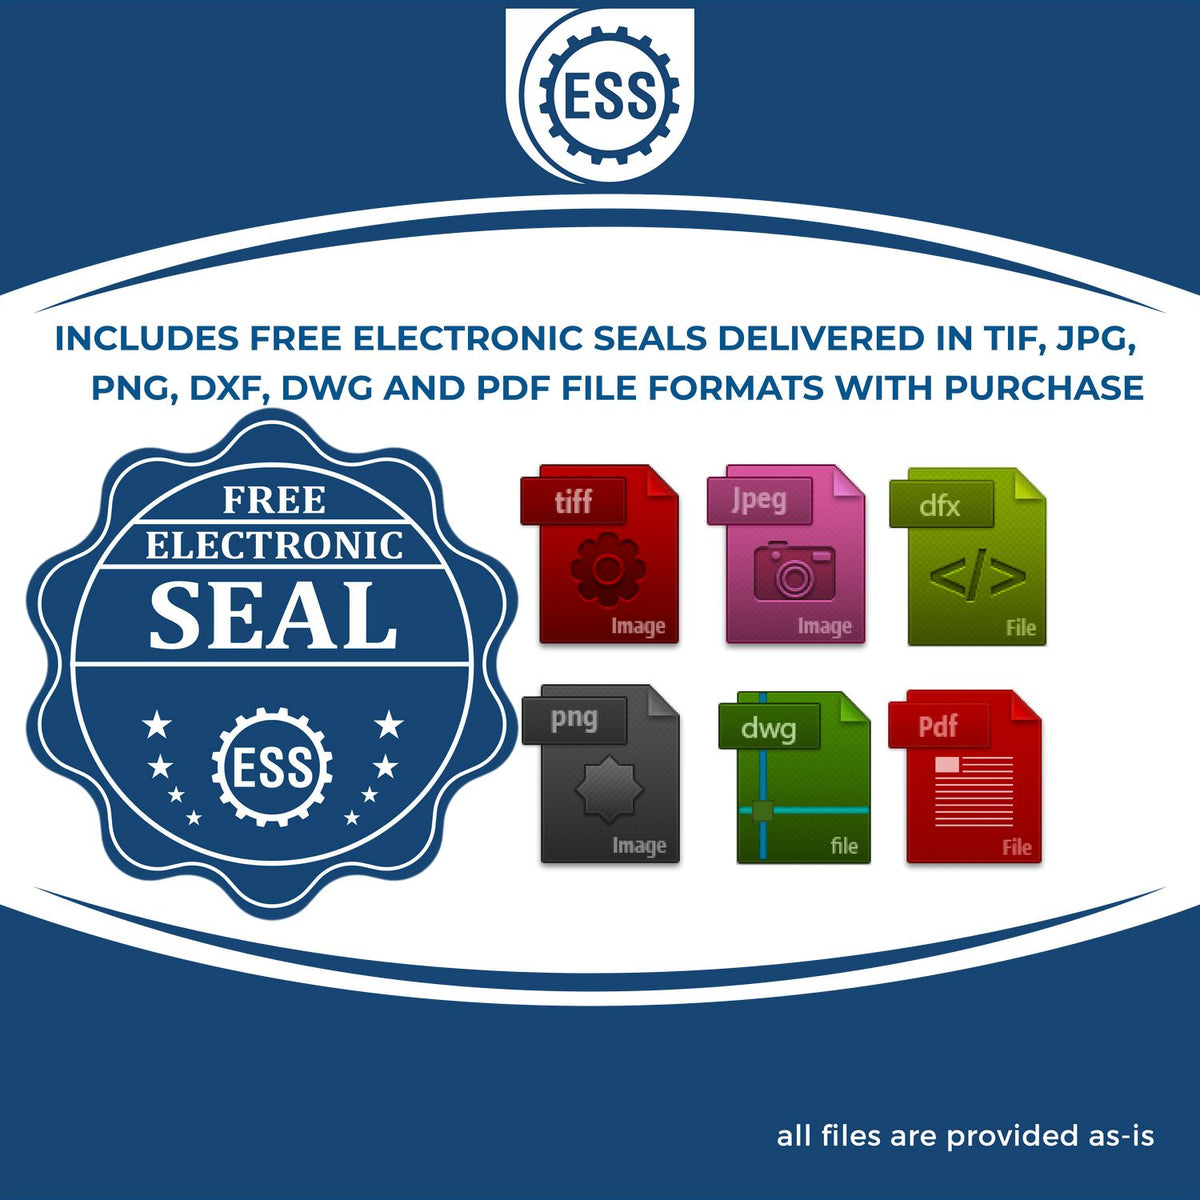 An infographic for the free electronic seal for the Gift Maryland Landscape Architect Seal illustrating the different file type icons such as DXF, DWG, TIF, JPG and PNG.